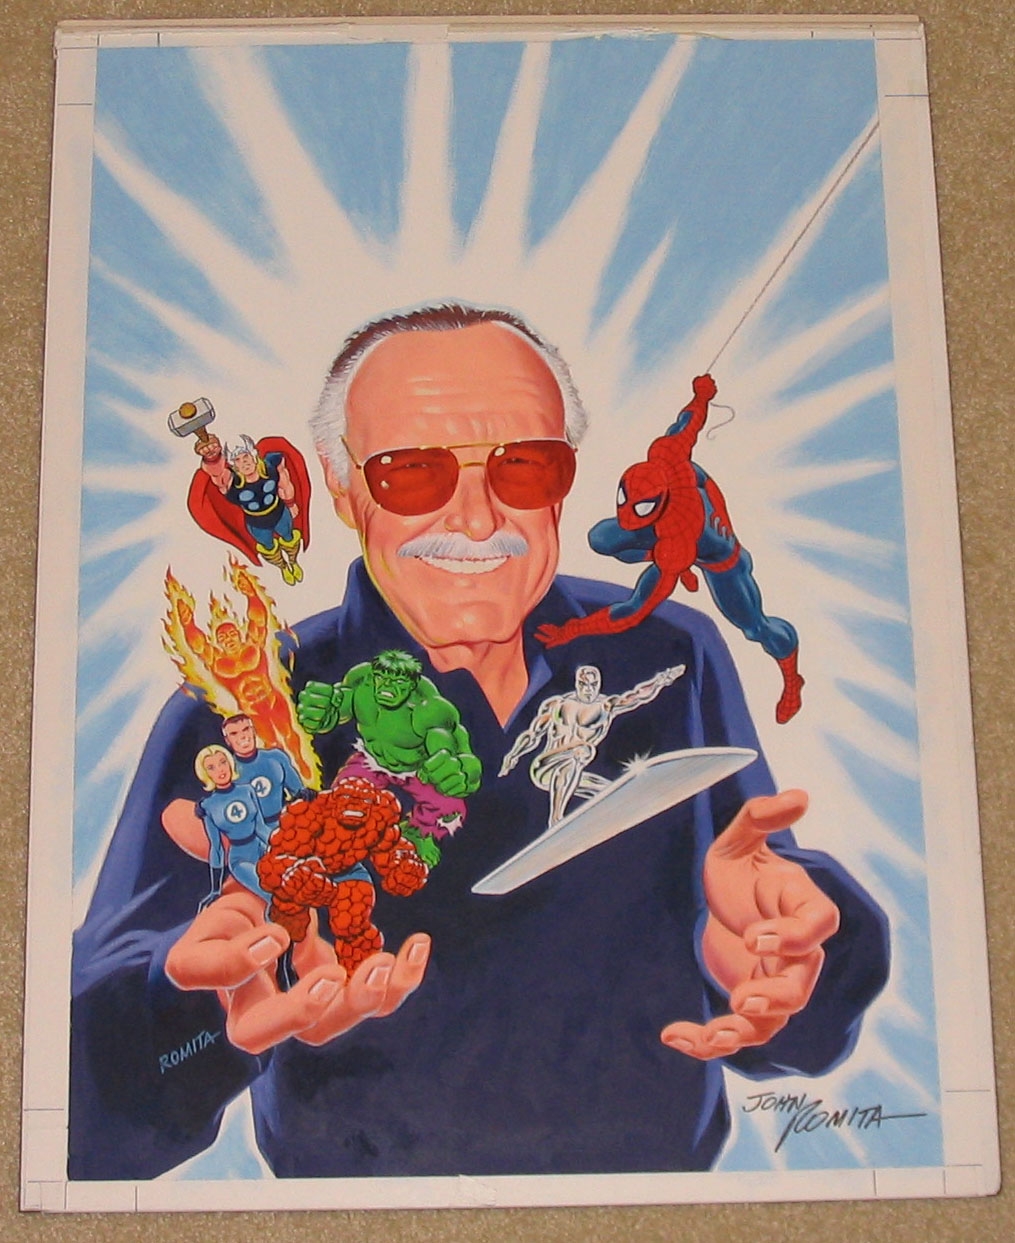 Painted Cover for Stan Lee's Autobiography, Excelsior! , in Comicart  Boston's Stan Lee (Romita, Doran) Comic Art Gallery Room